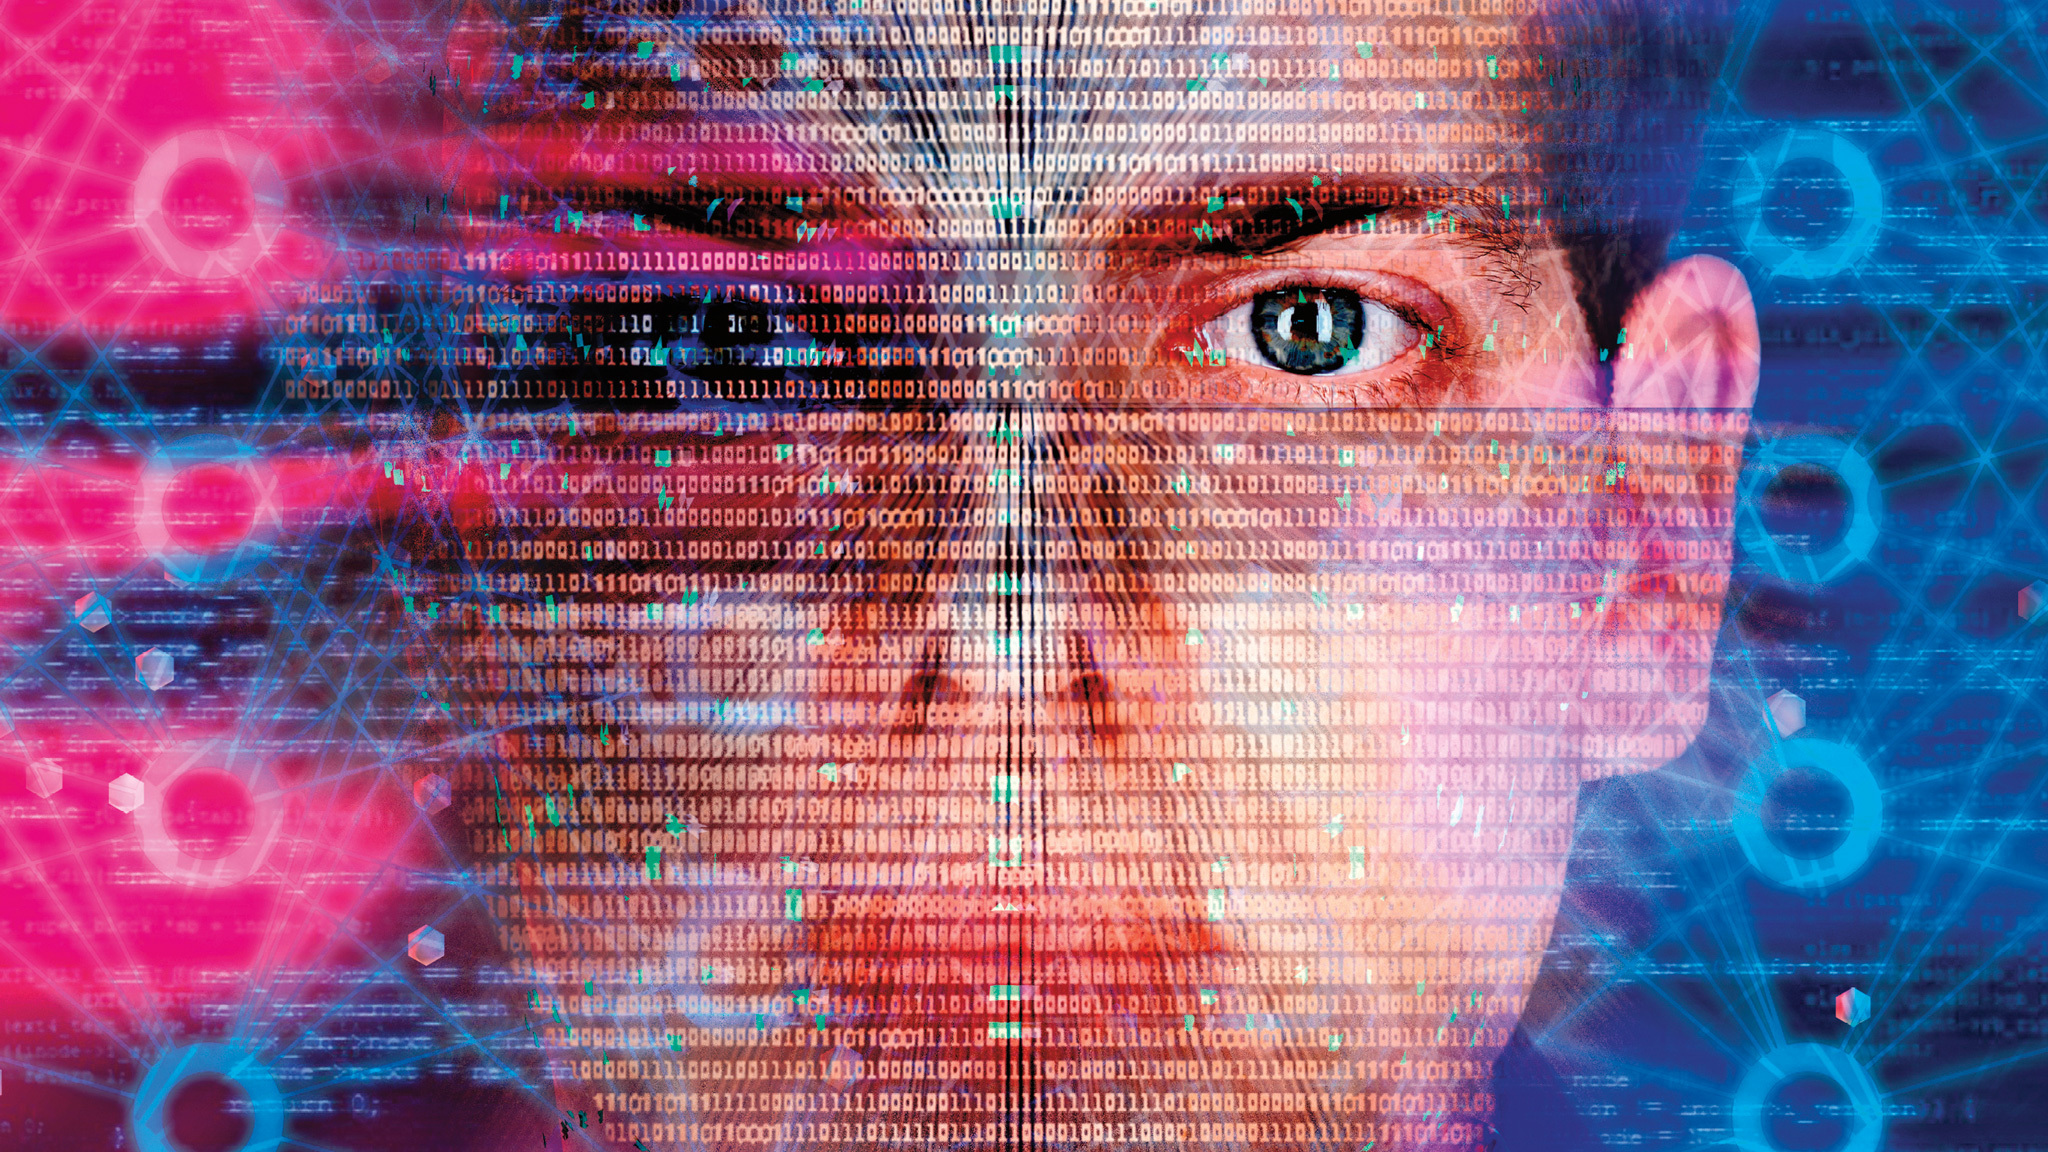 binary characters overlay a face seen in close-up, illustration